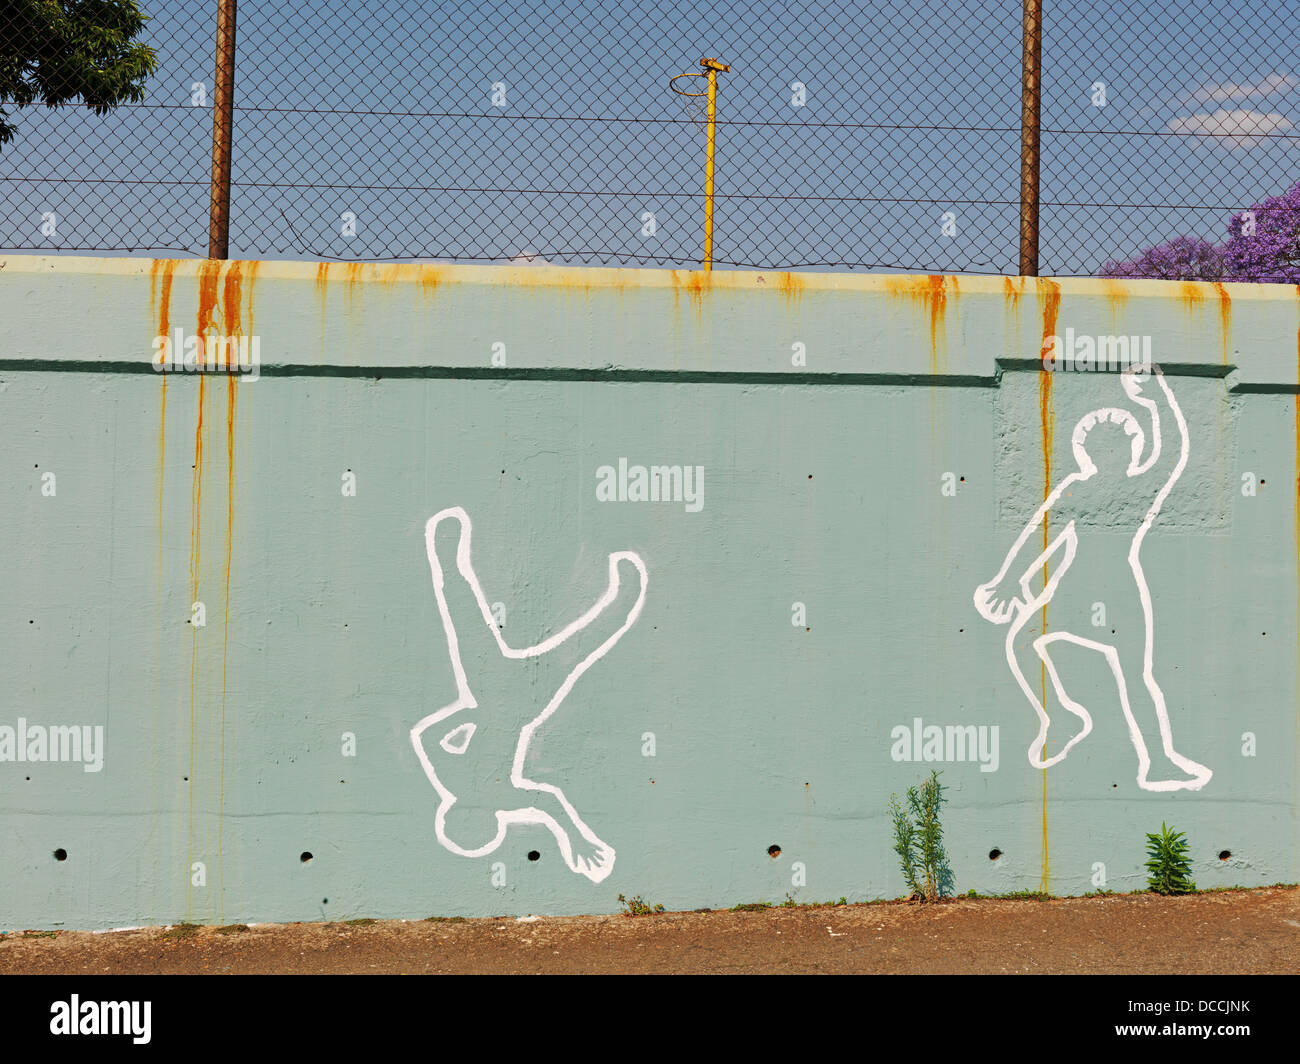 South Africa, Johannesburg, 2010. A mural on a school wall. The figure is reaching as if playing netball. Stock Photo